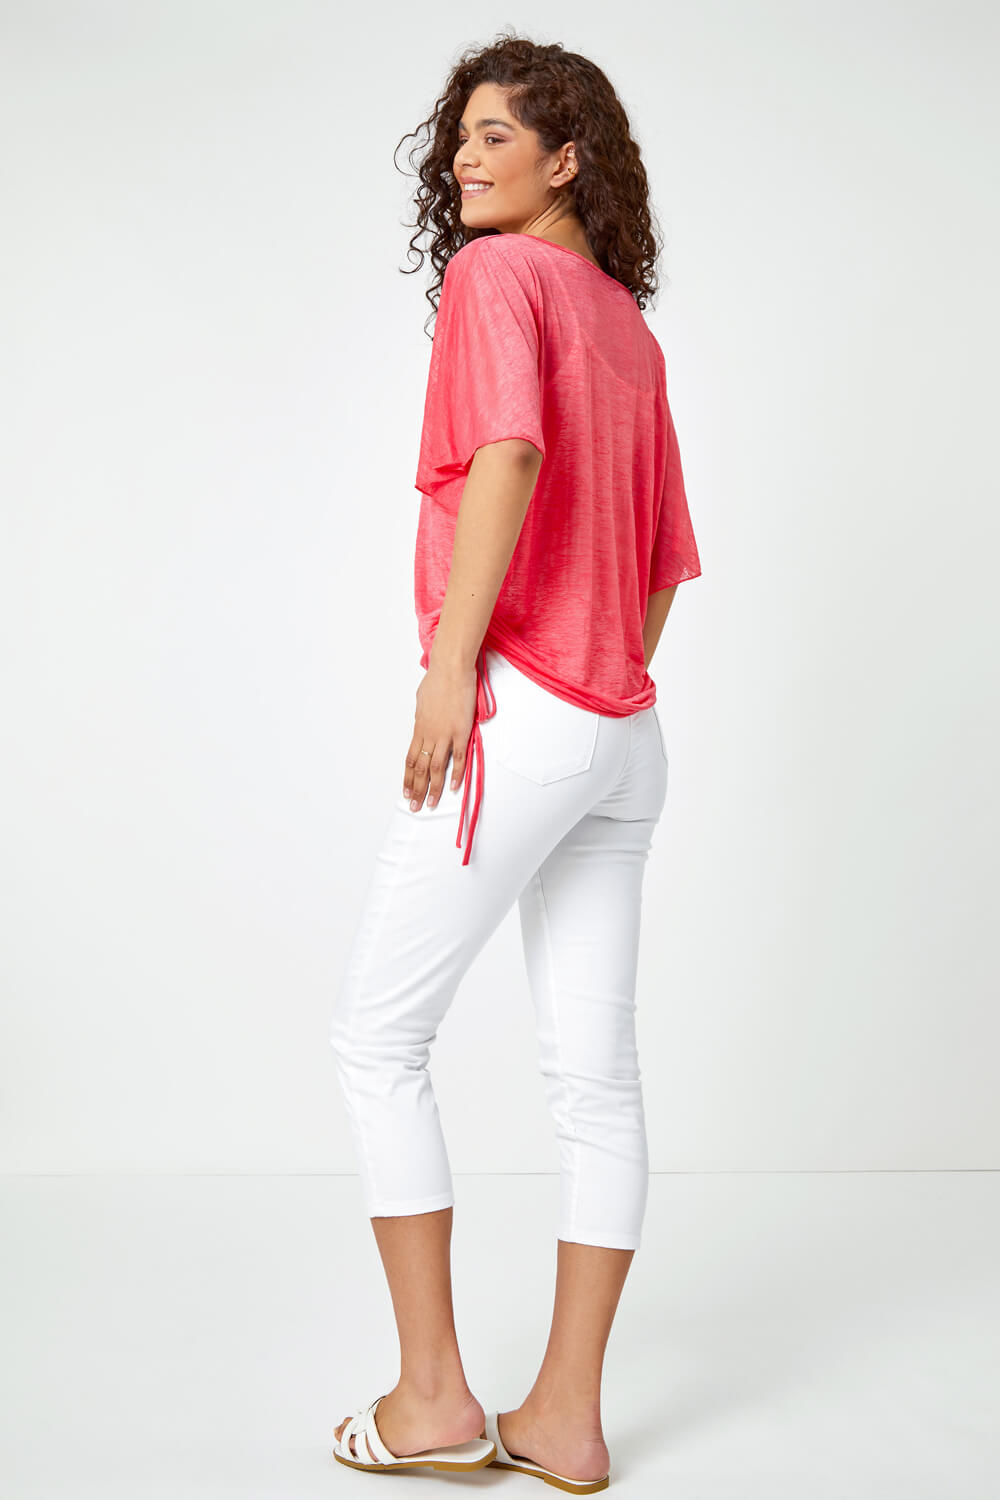 PINK Ruched Batwing Mesh Top, Image 3 of 5